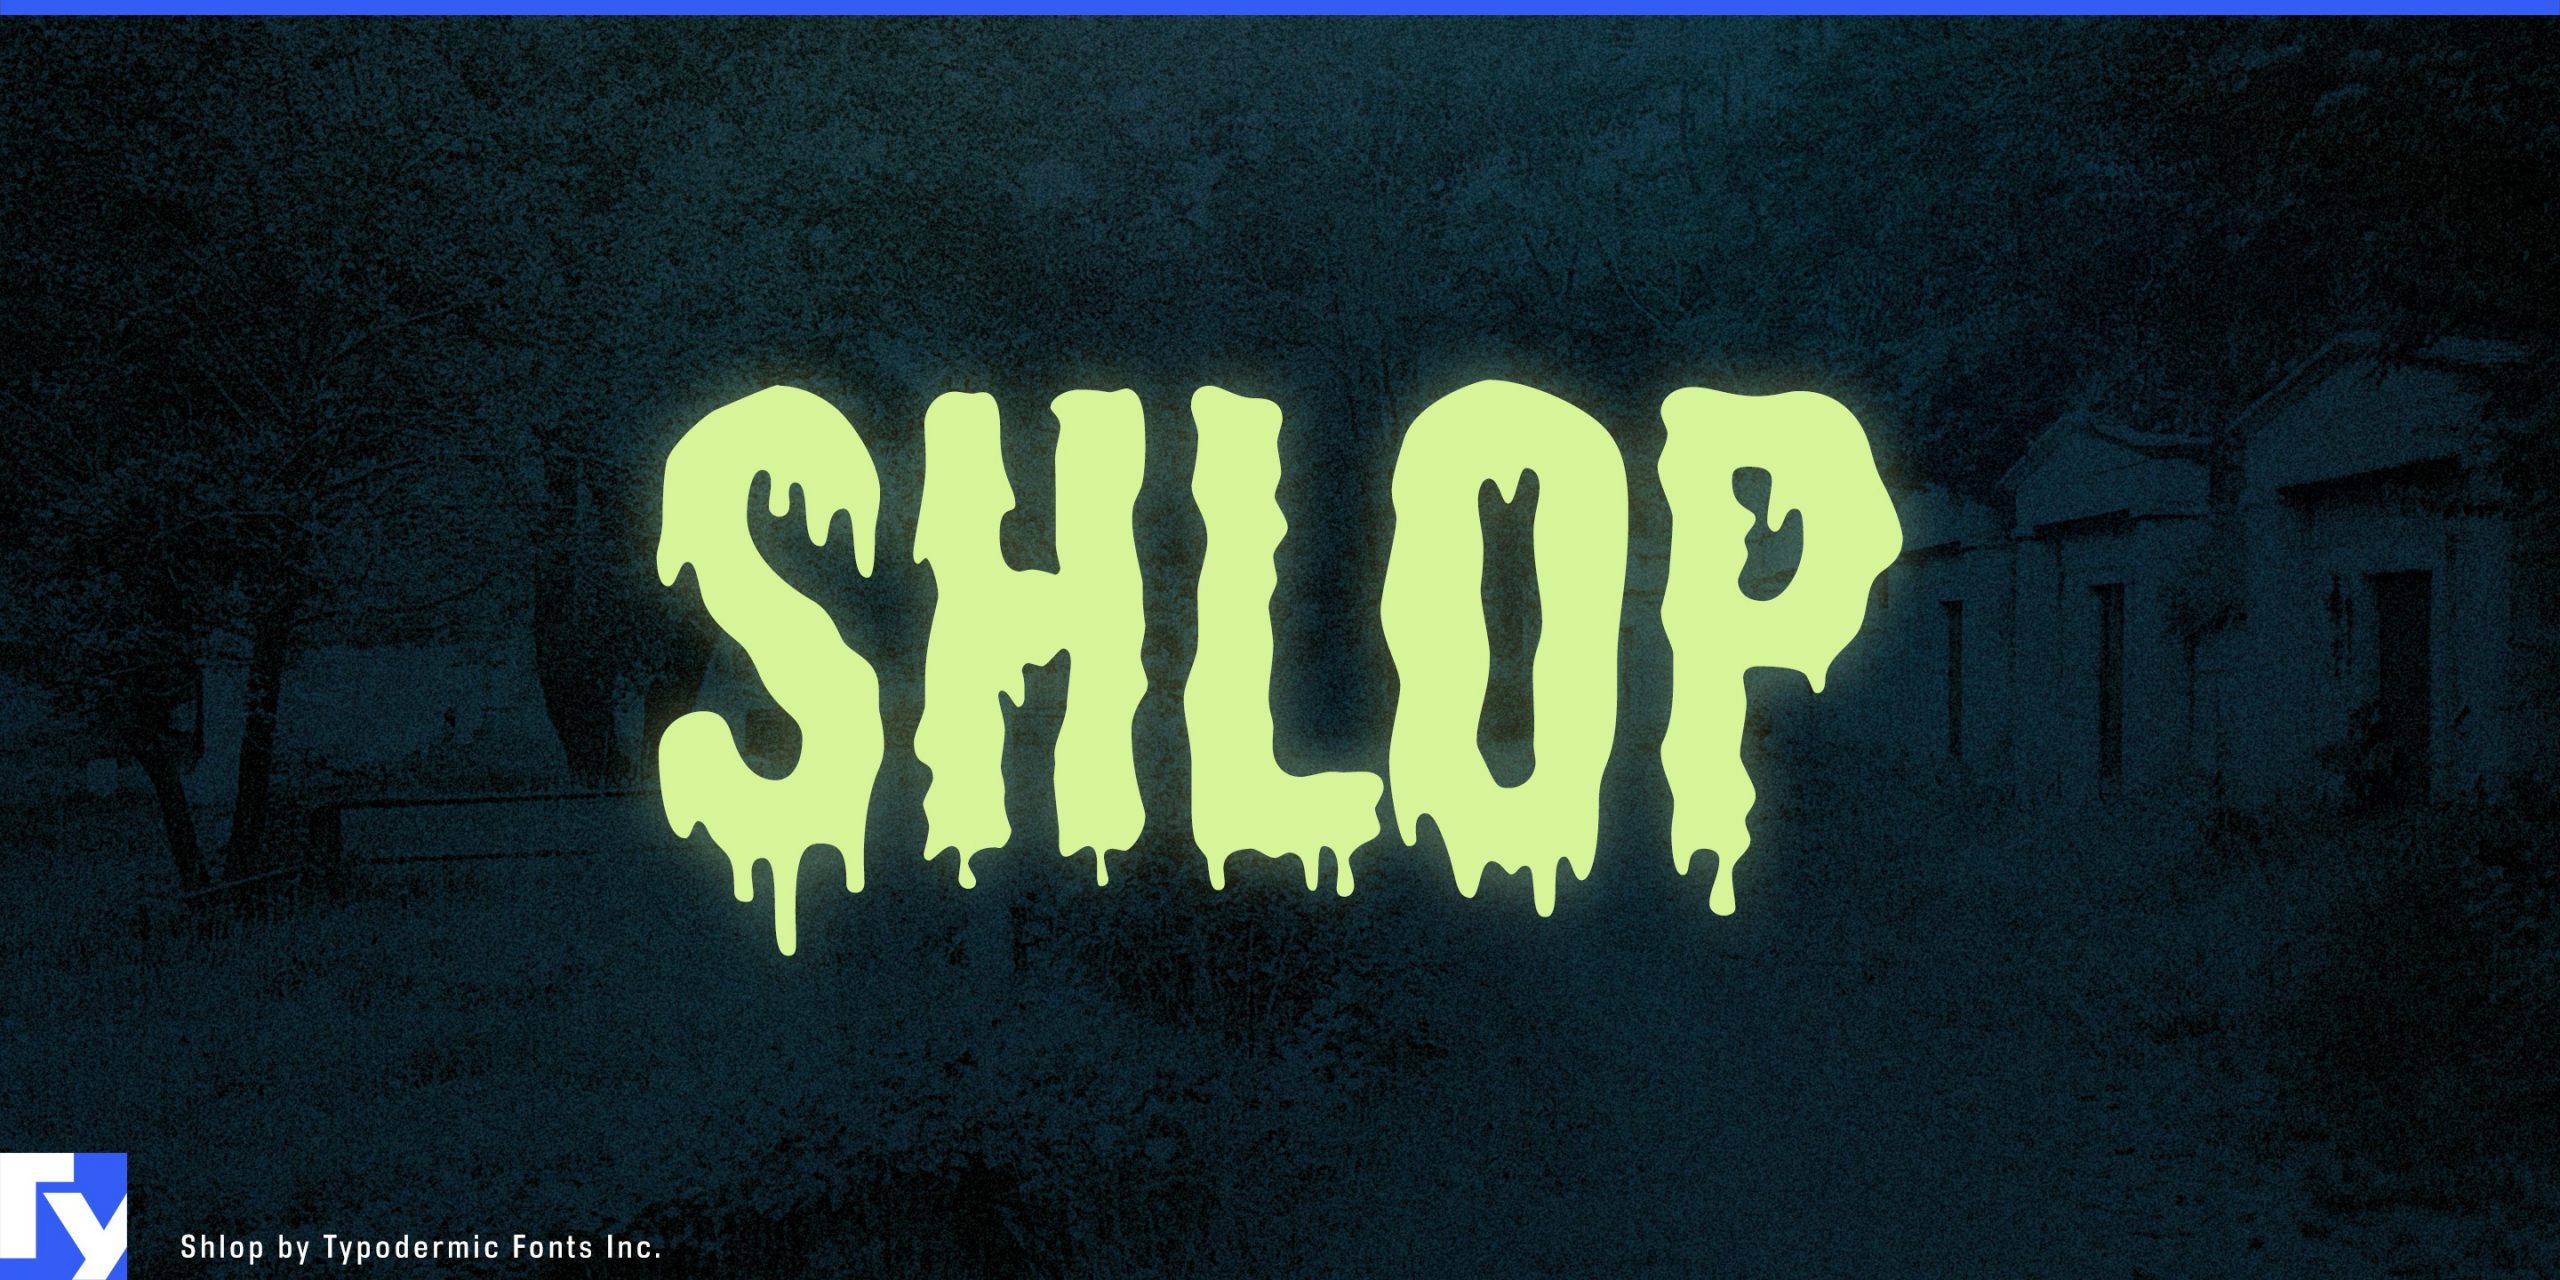 Watch as your designs invoke shivers of terror with Shlop typeface